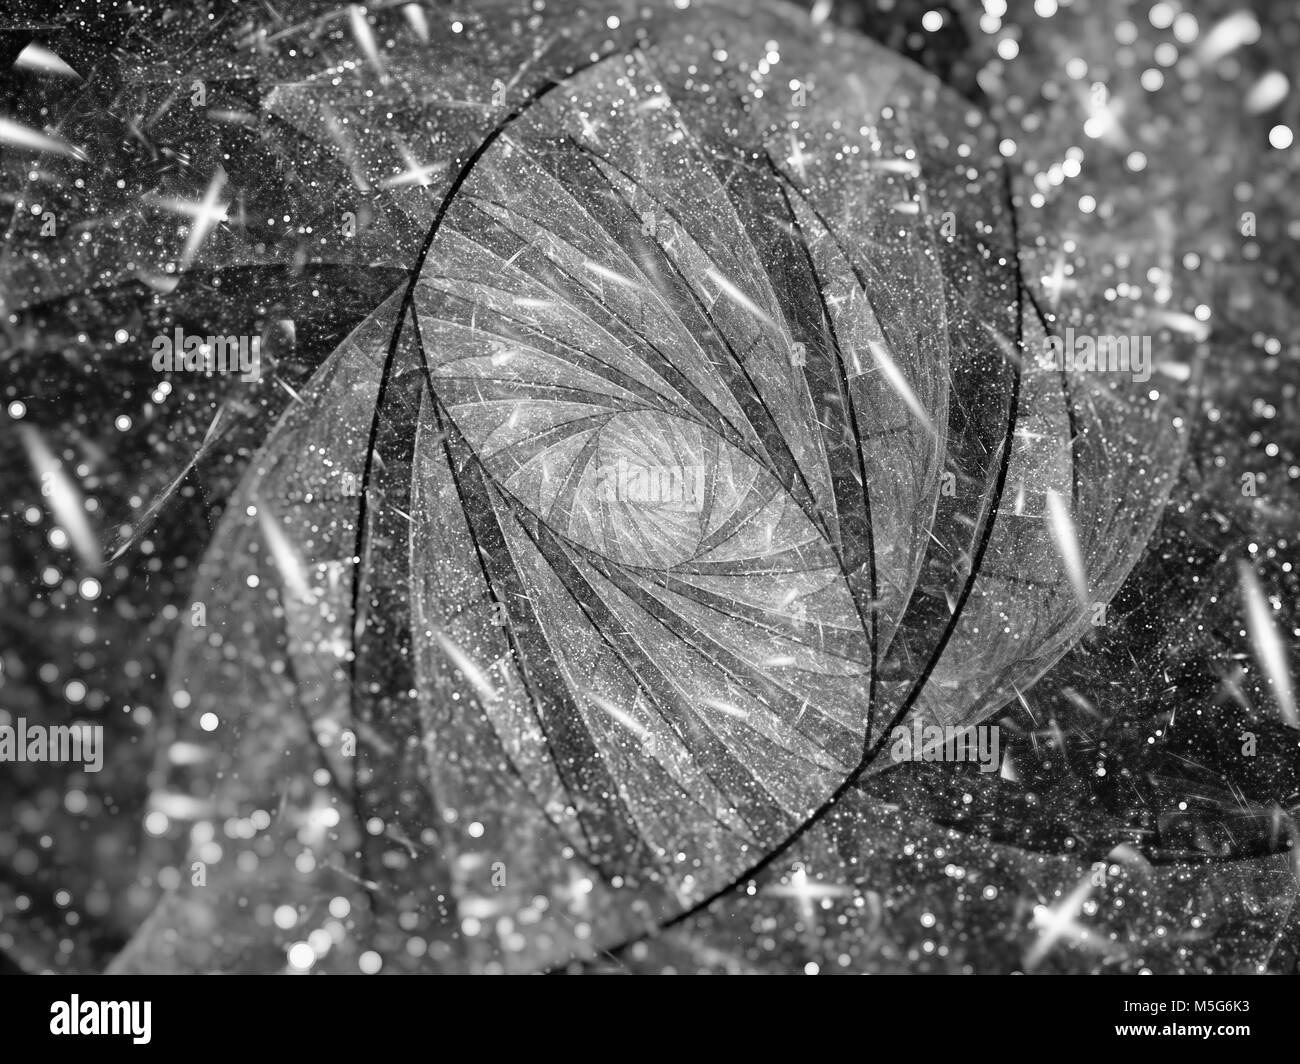 Stained-glass fractal spiral with particles, black and white, computer generated abstract texture for overlay or screen effect, 3D rendering Stock Photo